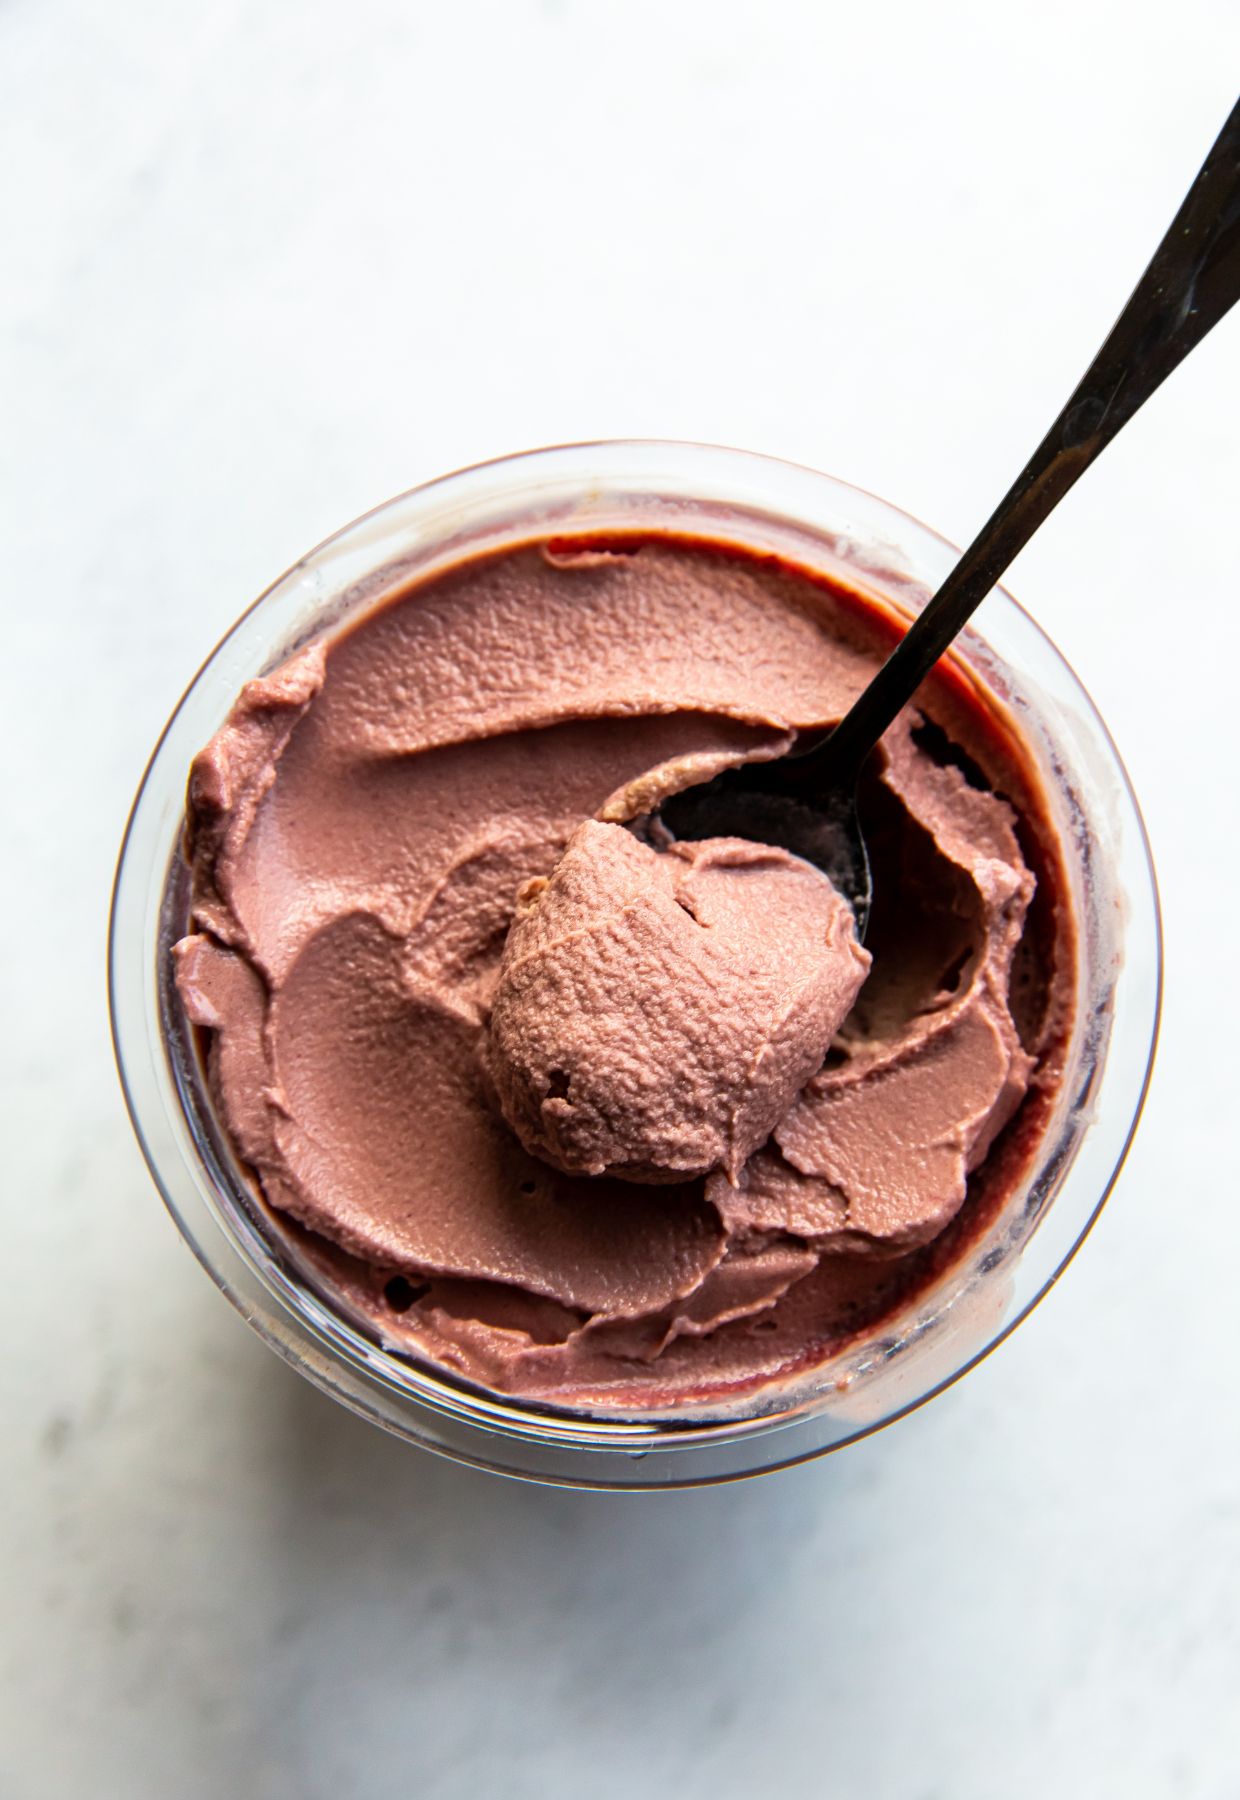 A top view of a glass jar filled with creamy chocolate cherry ice cream, prepared using Ninja Creami recipes, with a spoon scooping out a portion. The background is a light, smooth surface.